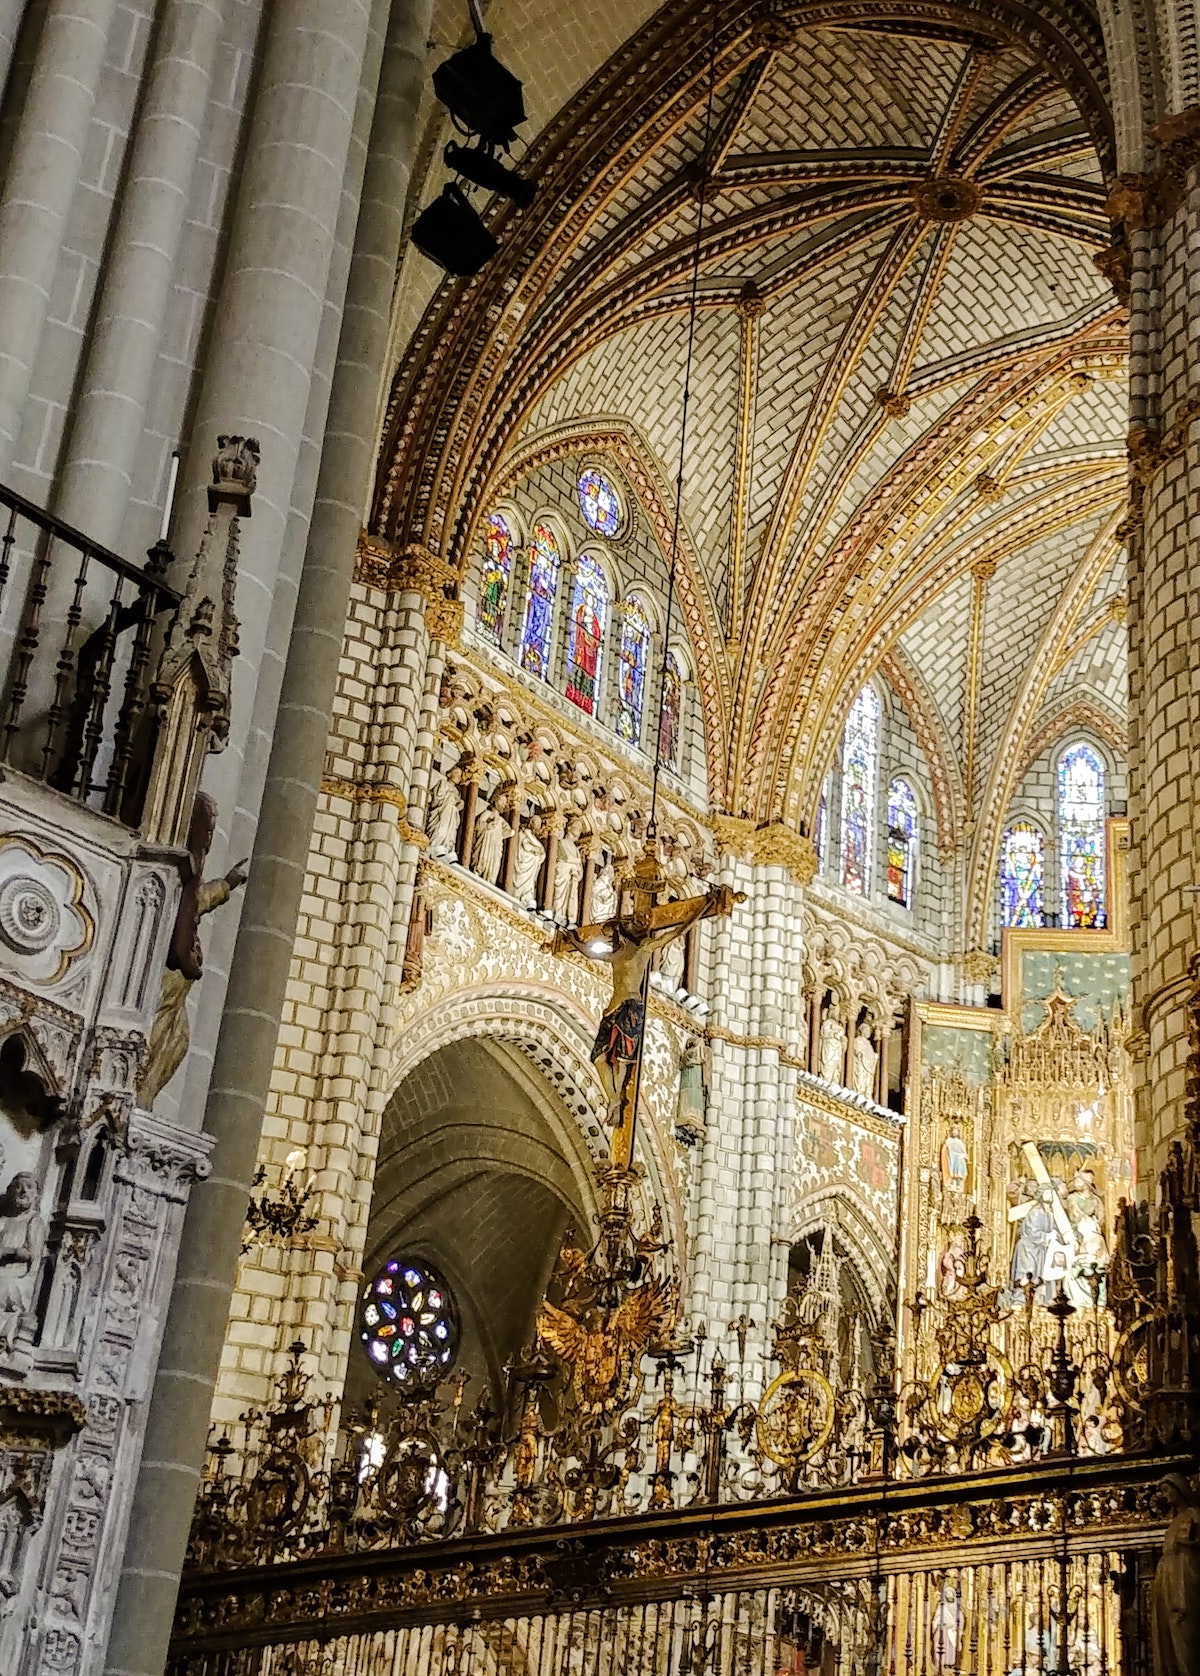 Elaborate interior of Gothic cathedral with Christian decorations.